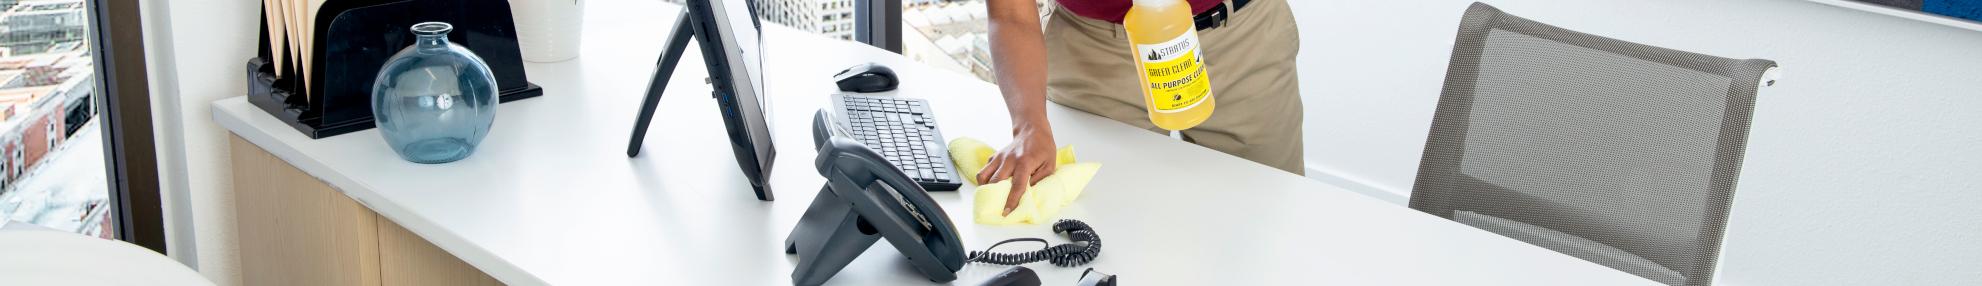 Office Cleaning Services Cleaning Services